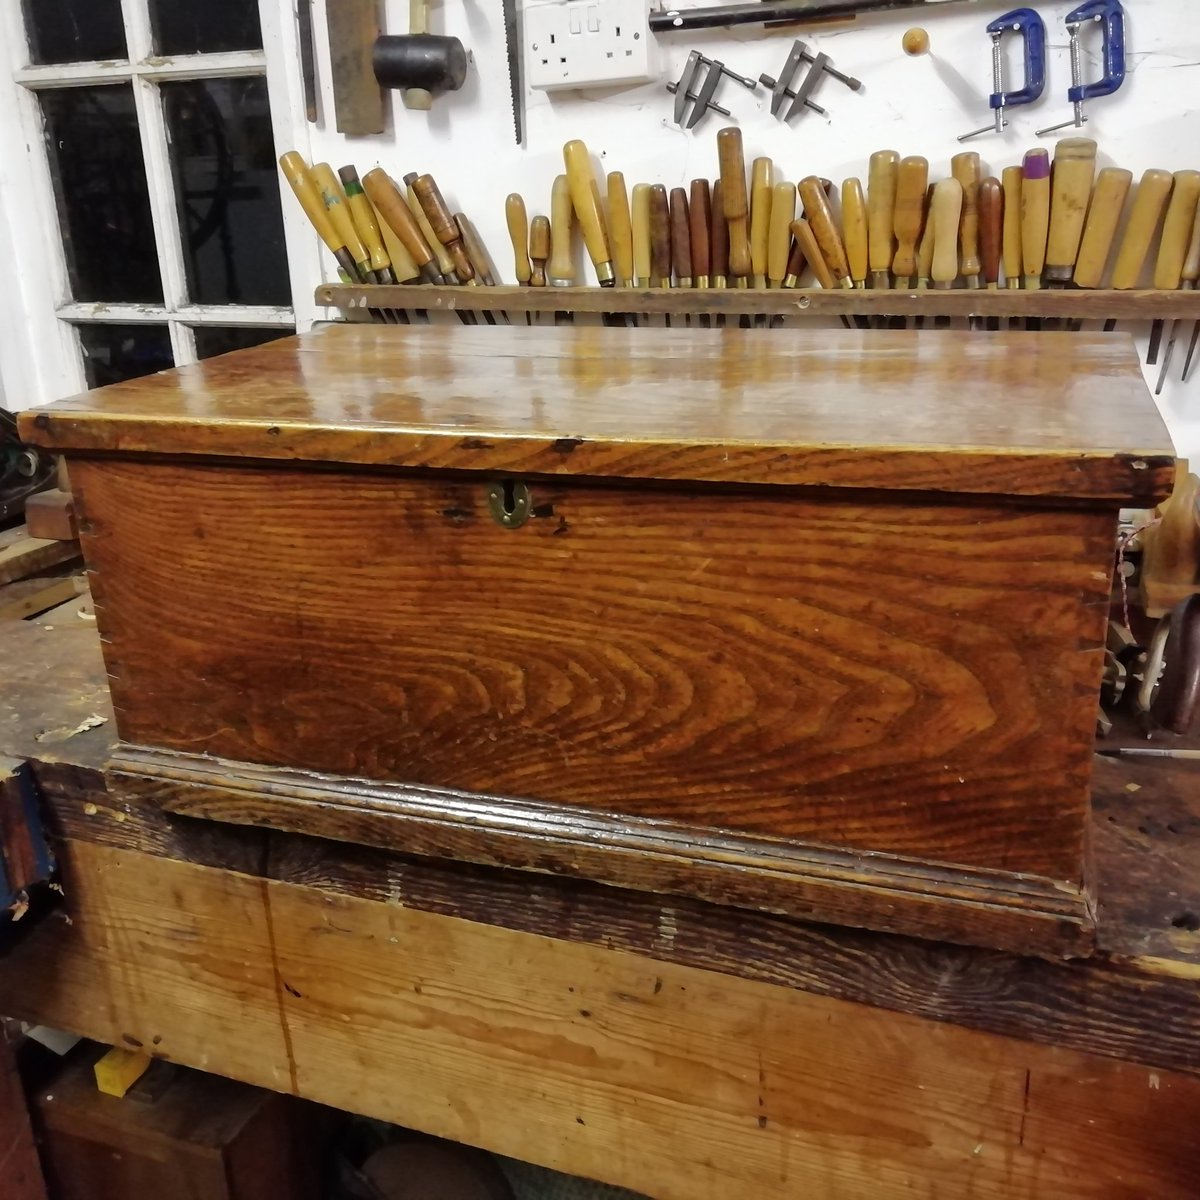 This beautiful 19th century elm boarded chest with through dovetail construction is for sale at Keer Antiques. #countryfurniture #elmboardedchest #suffolkantiquesforsale #antiqueinteriors